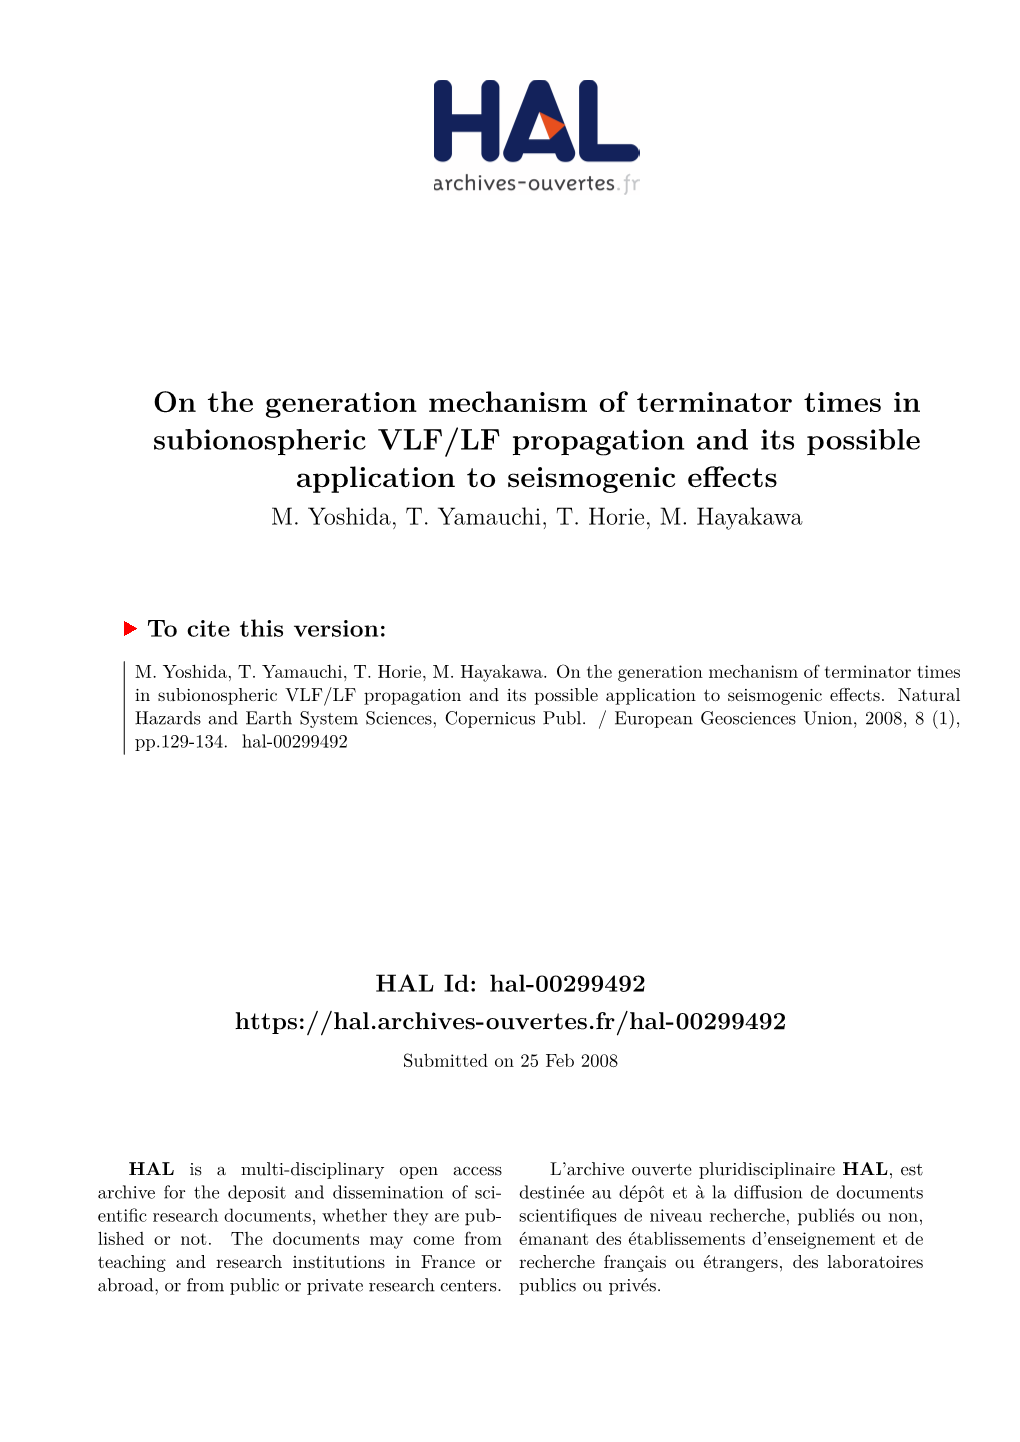 On the Generation Mechanism of Terminator Times in Subionospheric VLF/LF Propagation and Its Possible Application to Seismogenic Effects M